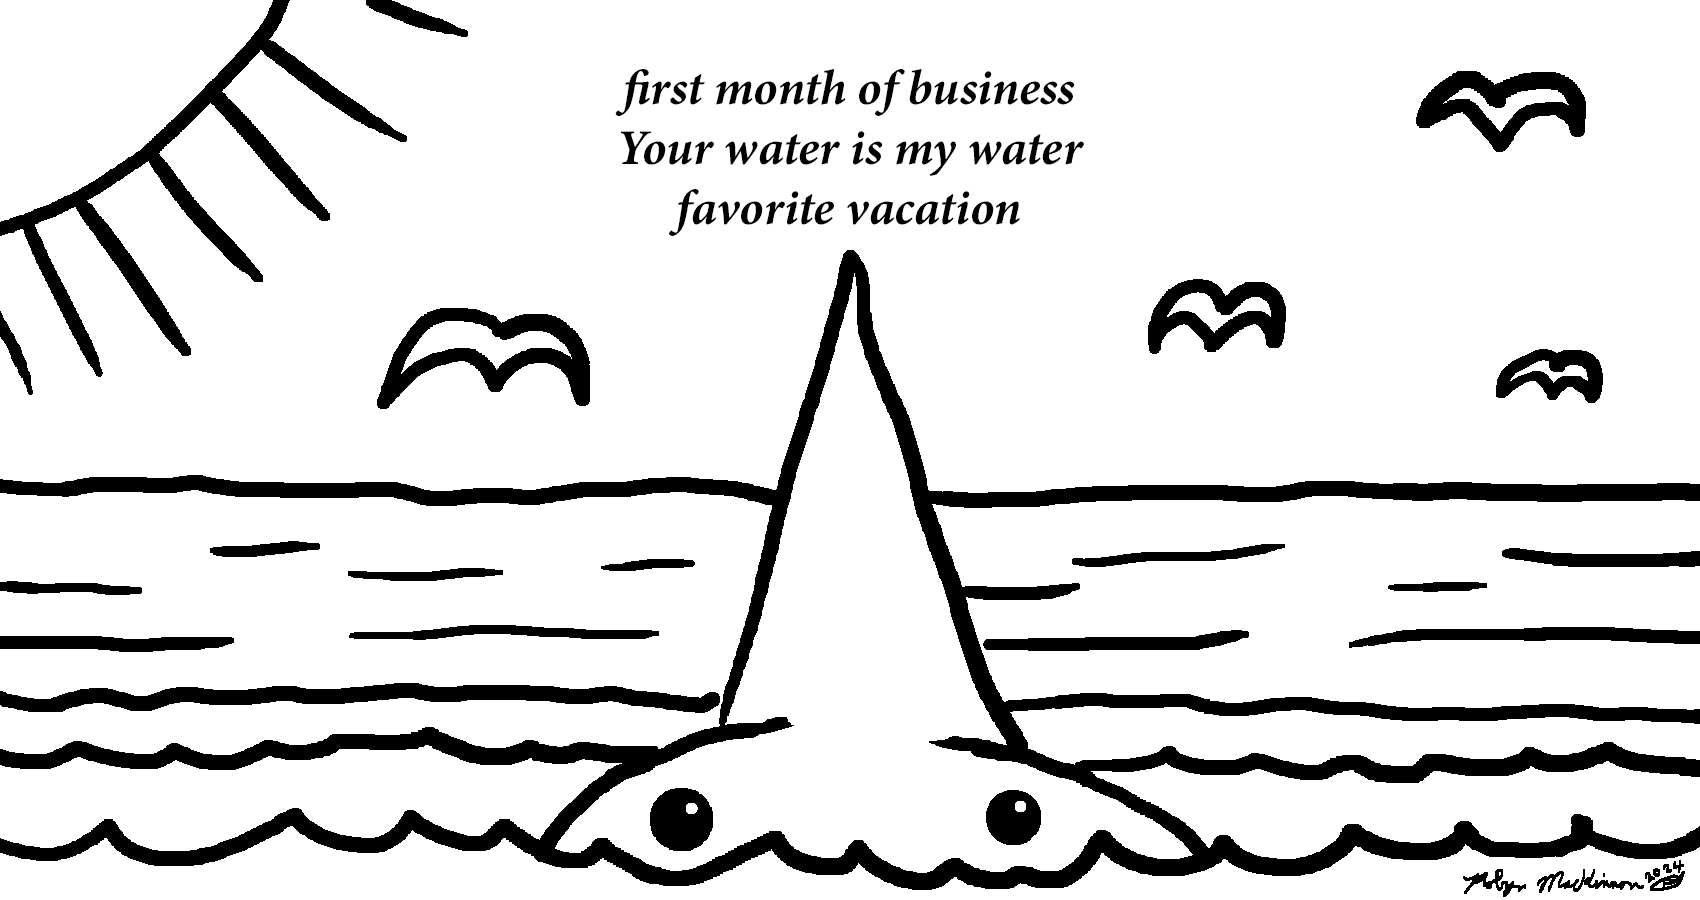 Your Water is My Water, a haiku by Robyn MacKinnon at Spillwords.com